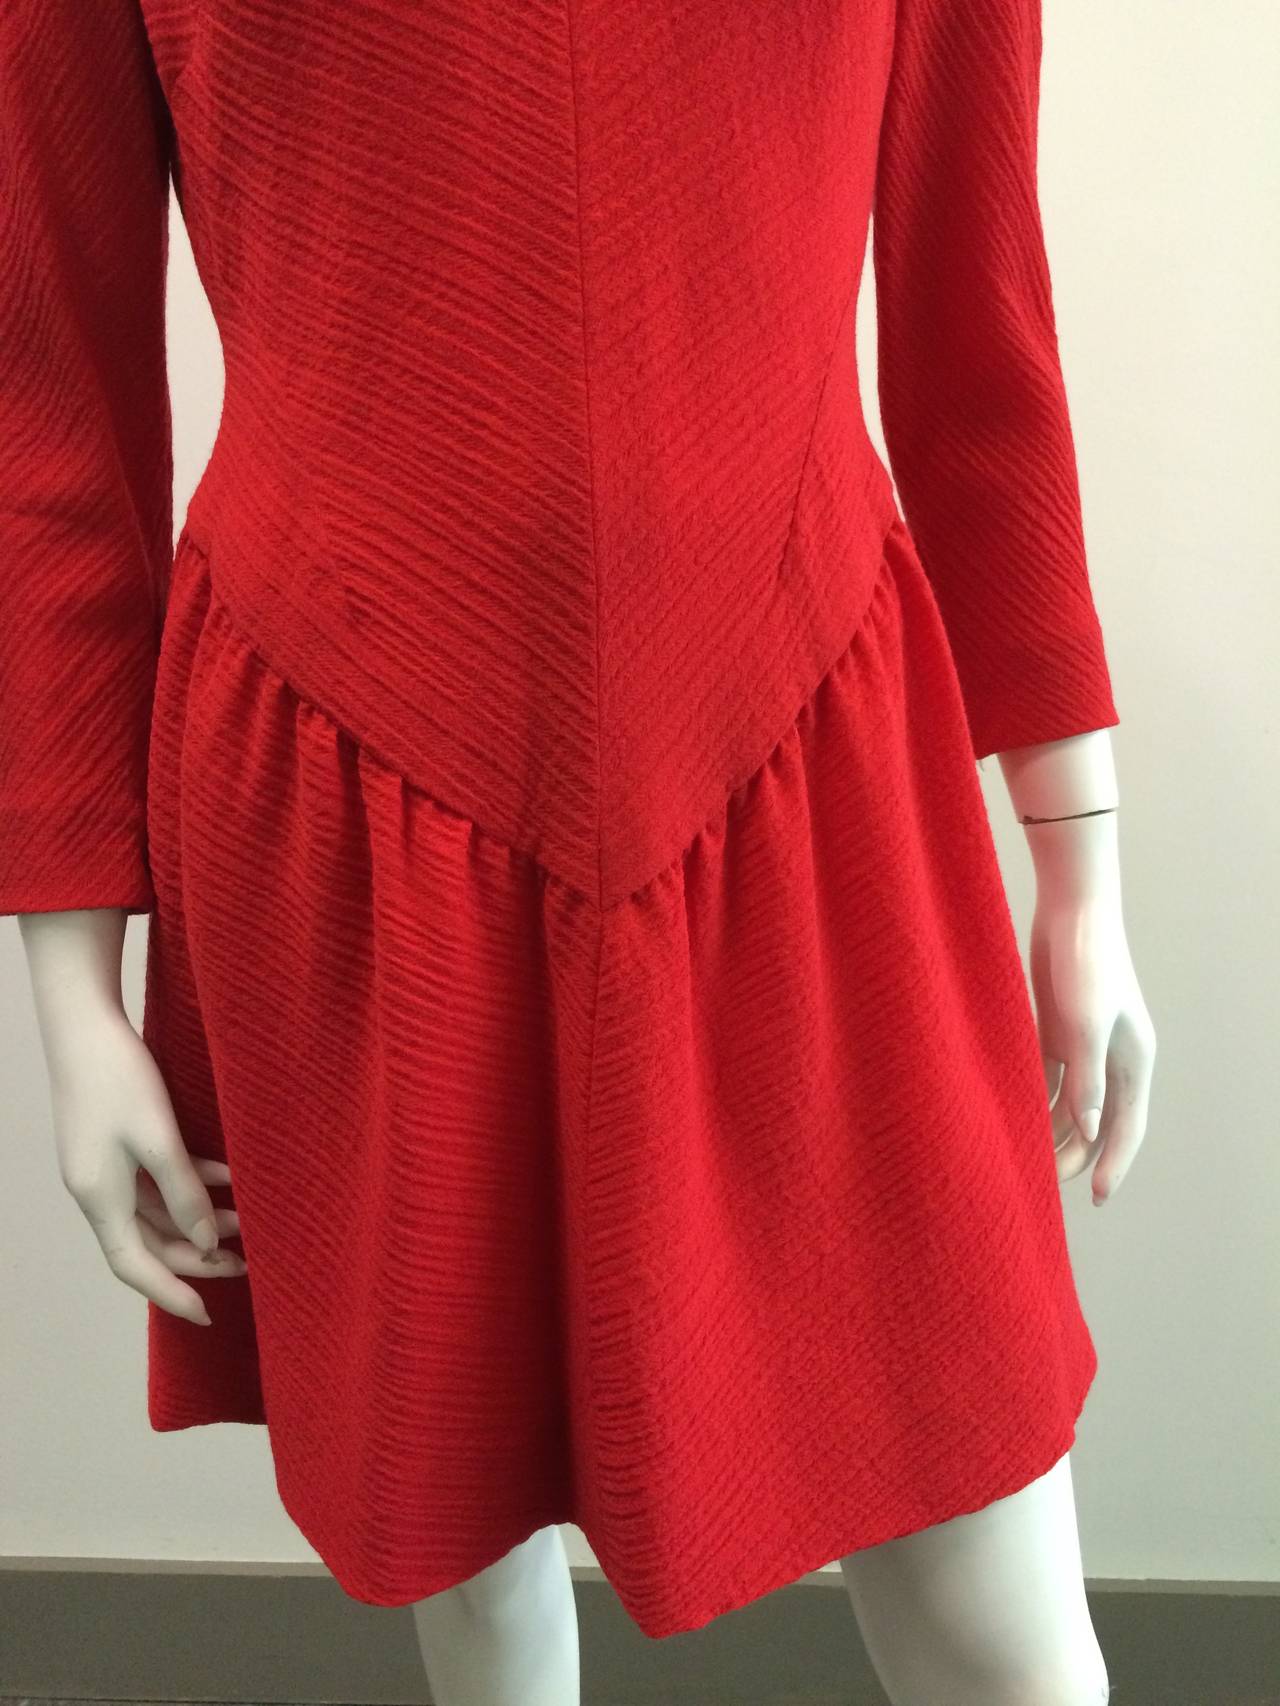 Women's Pauline Trigere for Bergdorf Goodman 1980s Red Wool Dress Size 6. For Sale